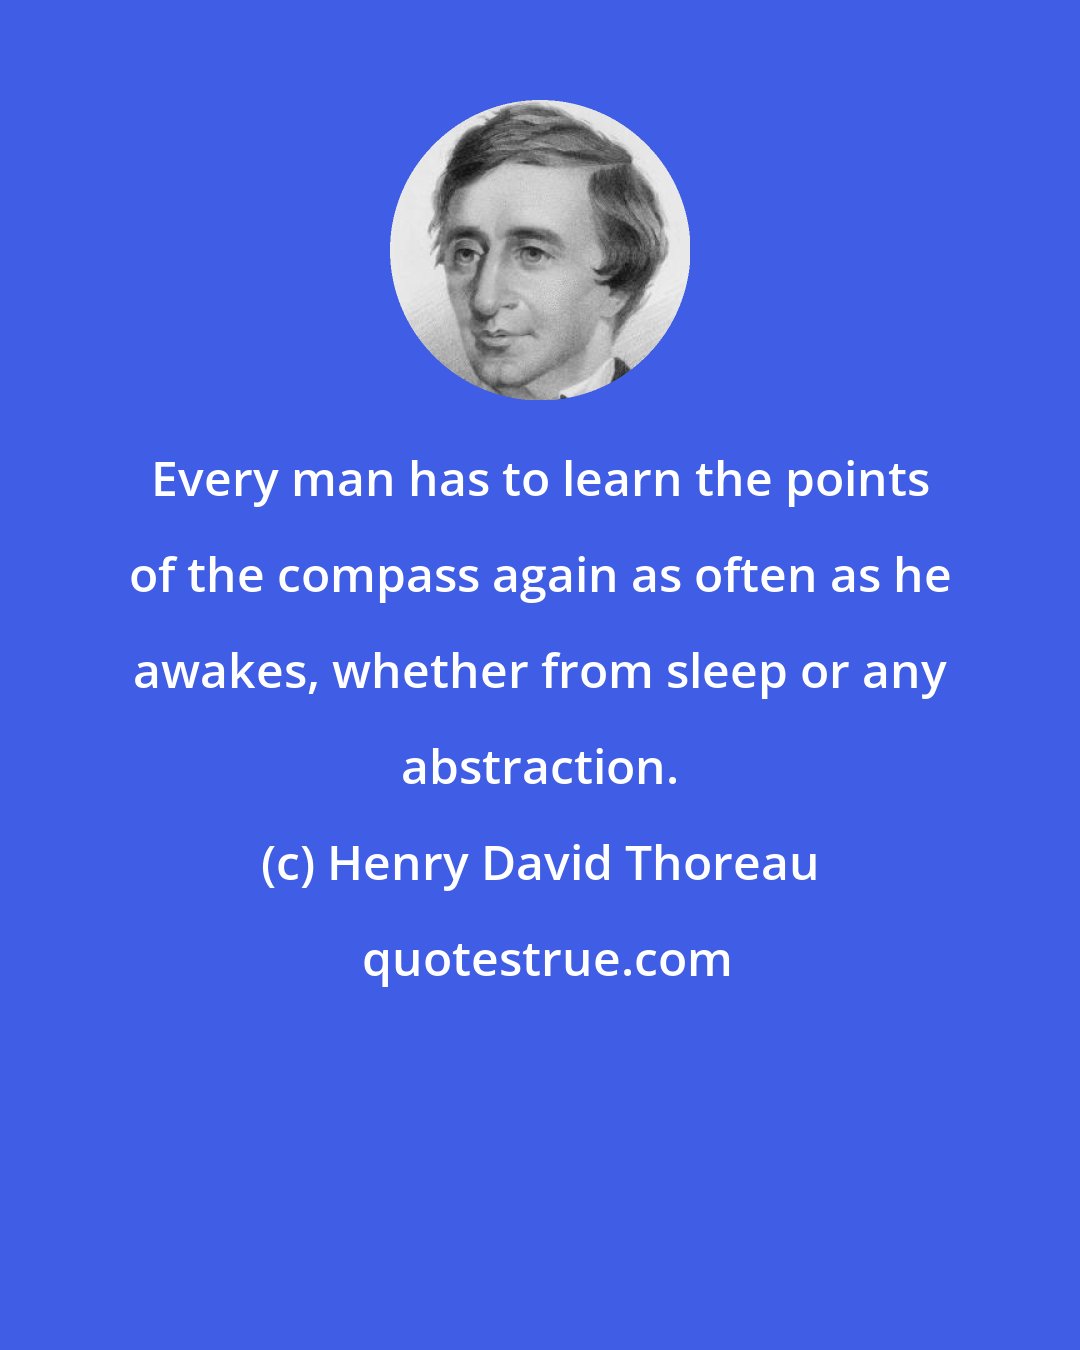 Henry David Thoreau: Every man has to learn the points of the compass again as often as he awakes, whether from sleep or any abstraction.